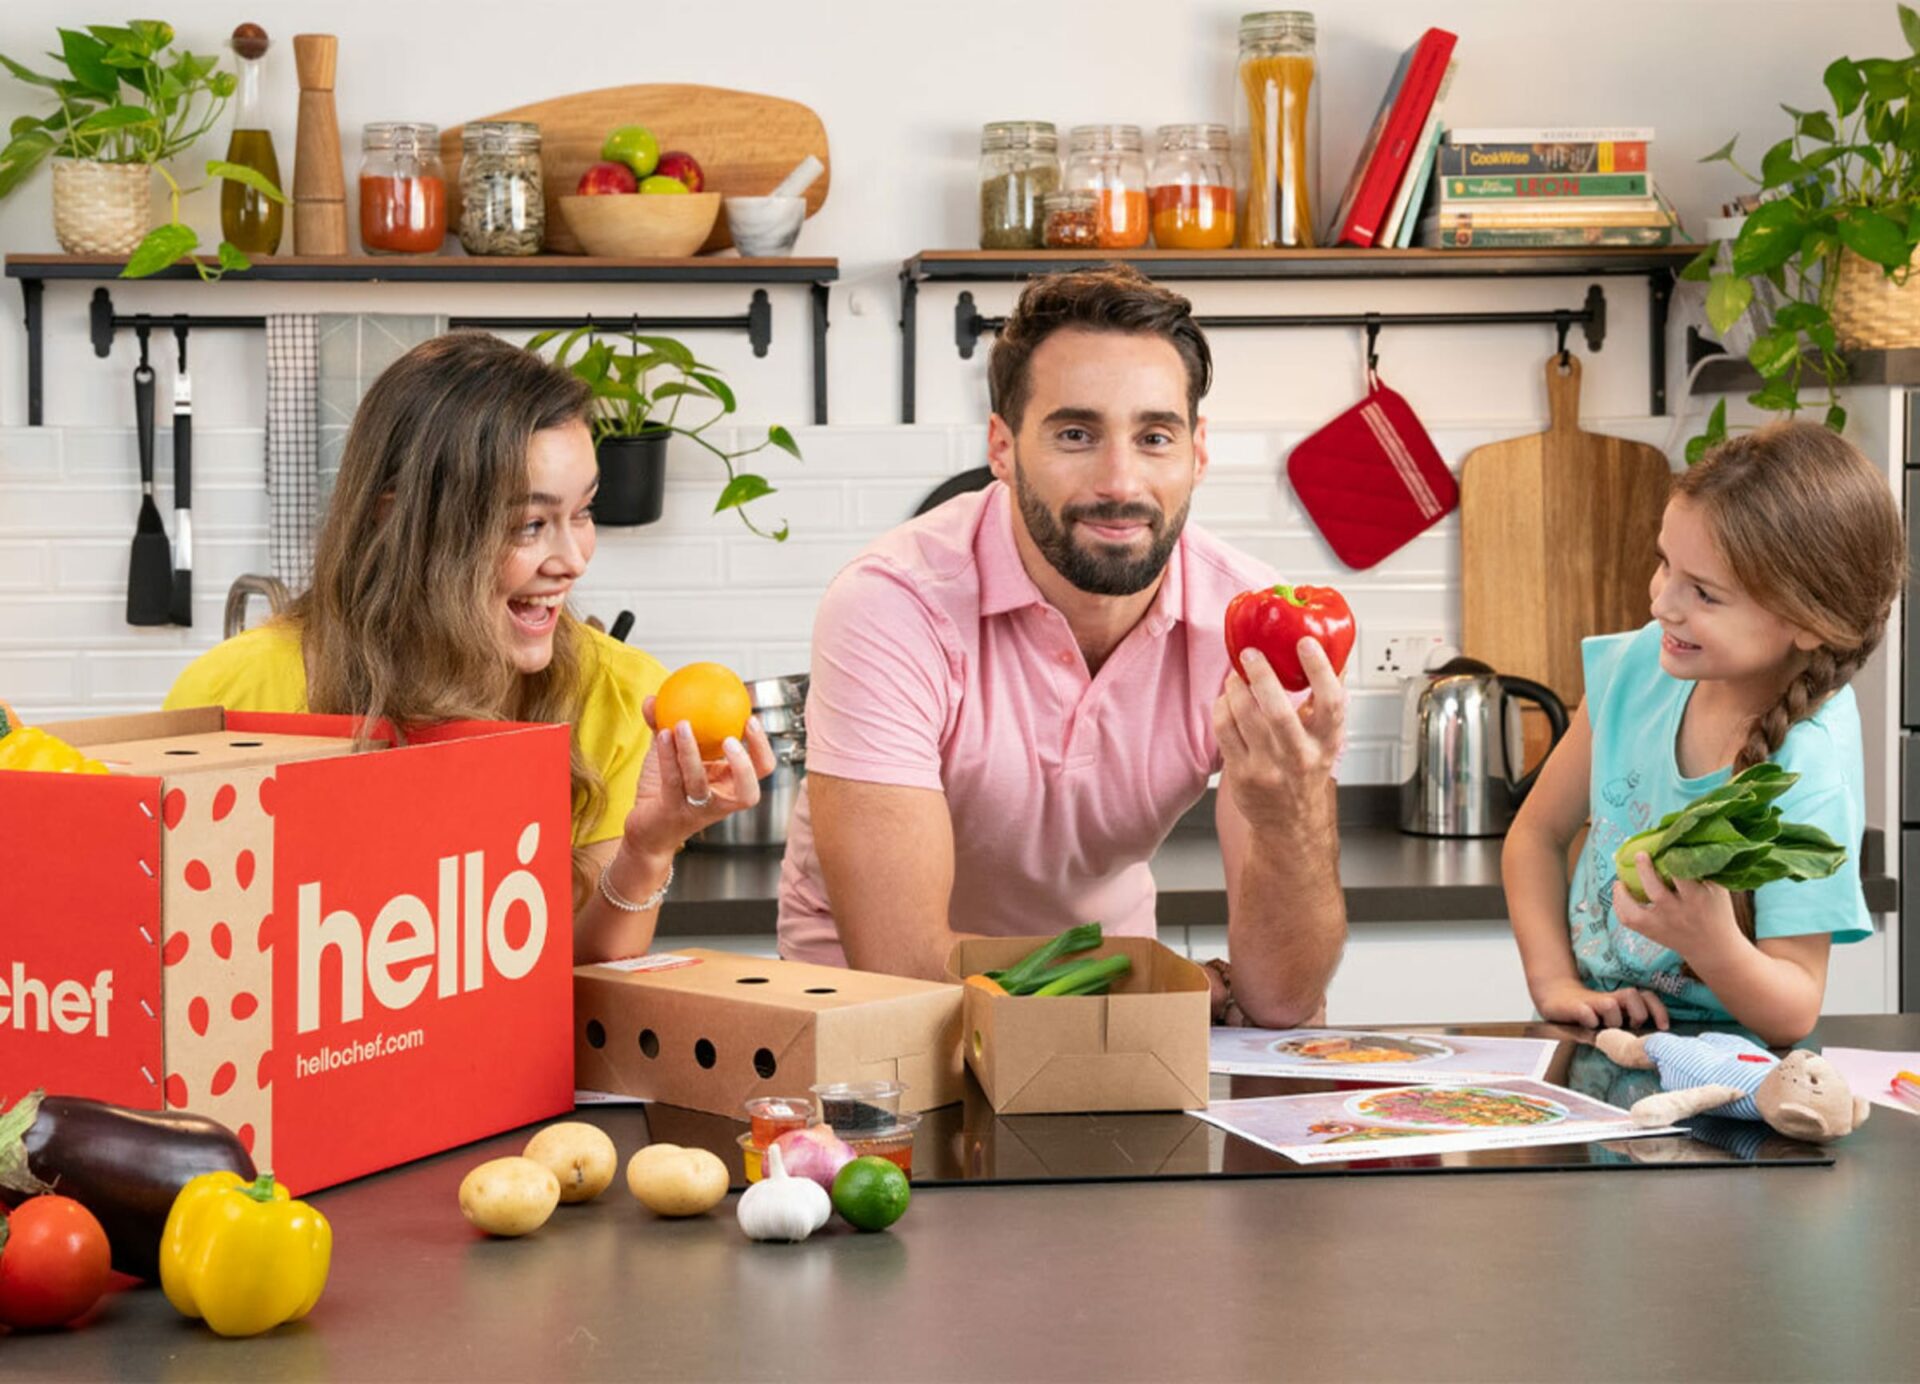 Brand Refresh Photoshoot for Hello Chef, a home meal kit delivery service